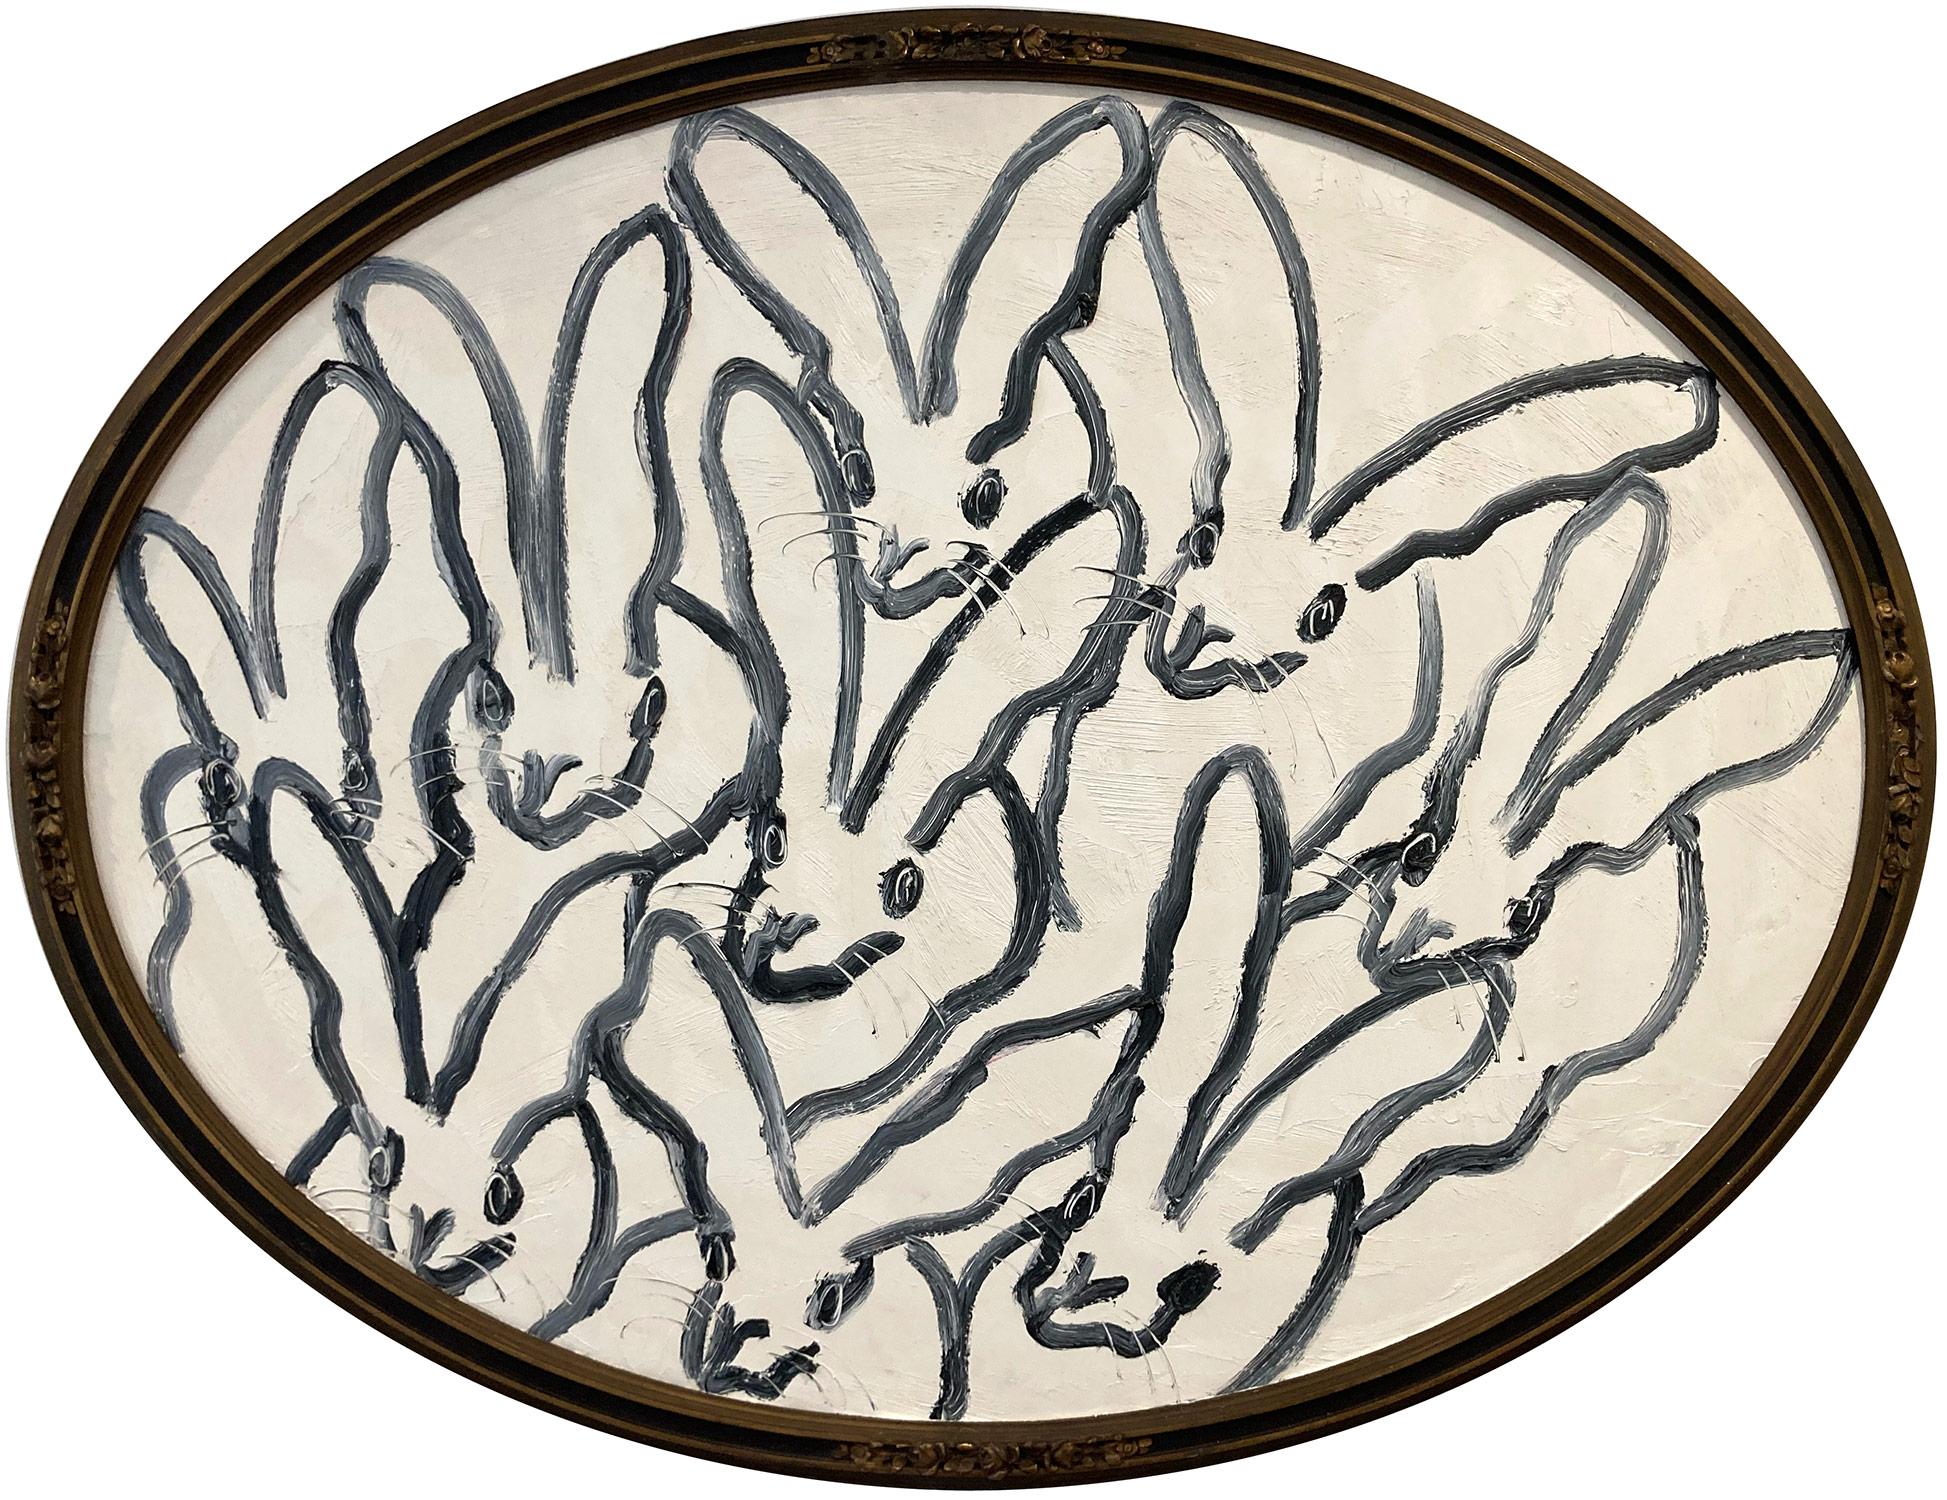 Hunt Slonem Animal Painting - "Bunnys Tondo" Black Outlined Bunnies on White Background in Oval Antique Frame